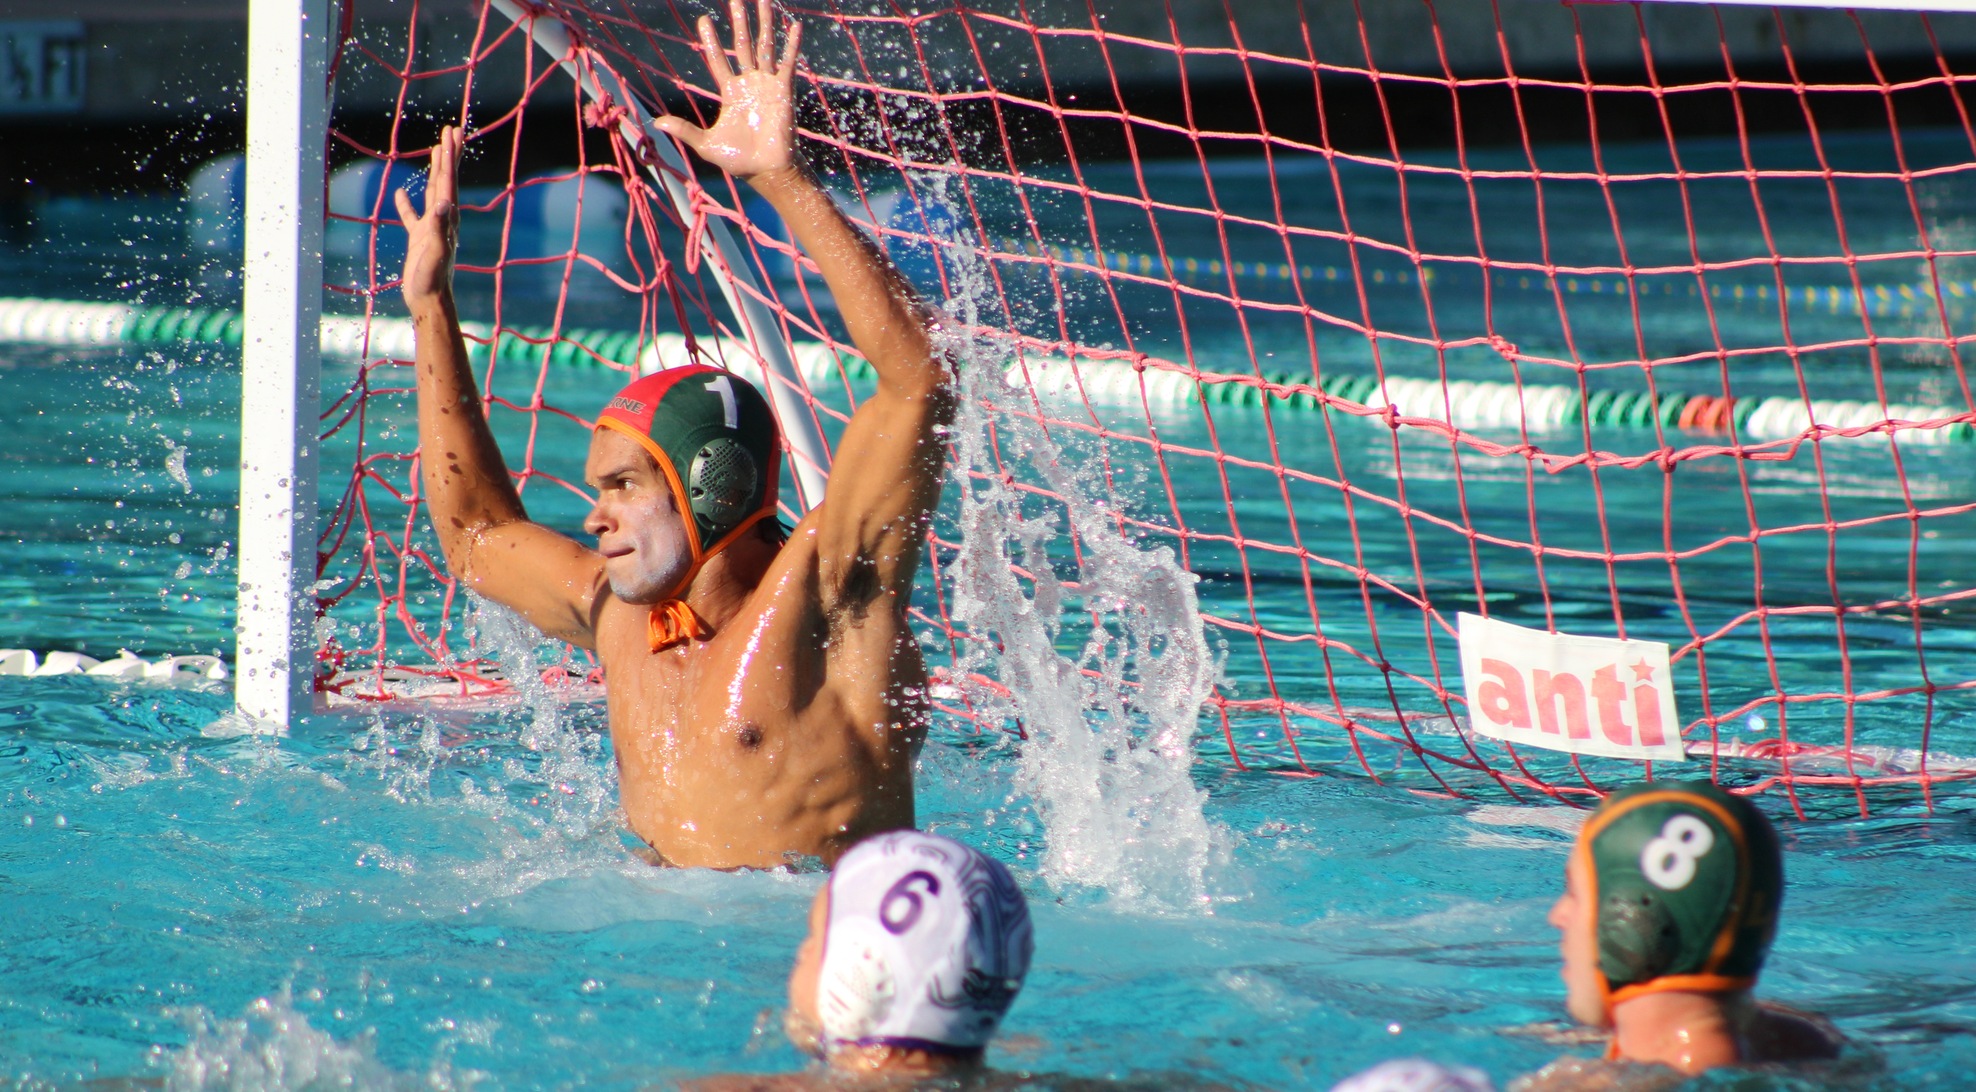 Men's Water Polo gives Whittier scare